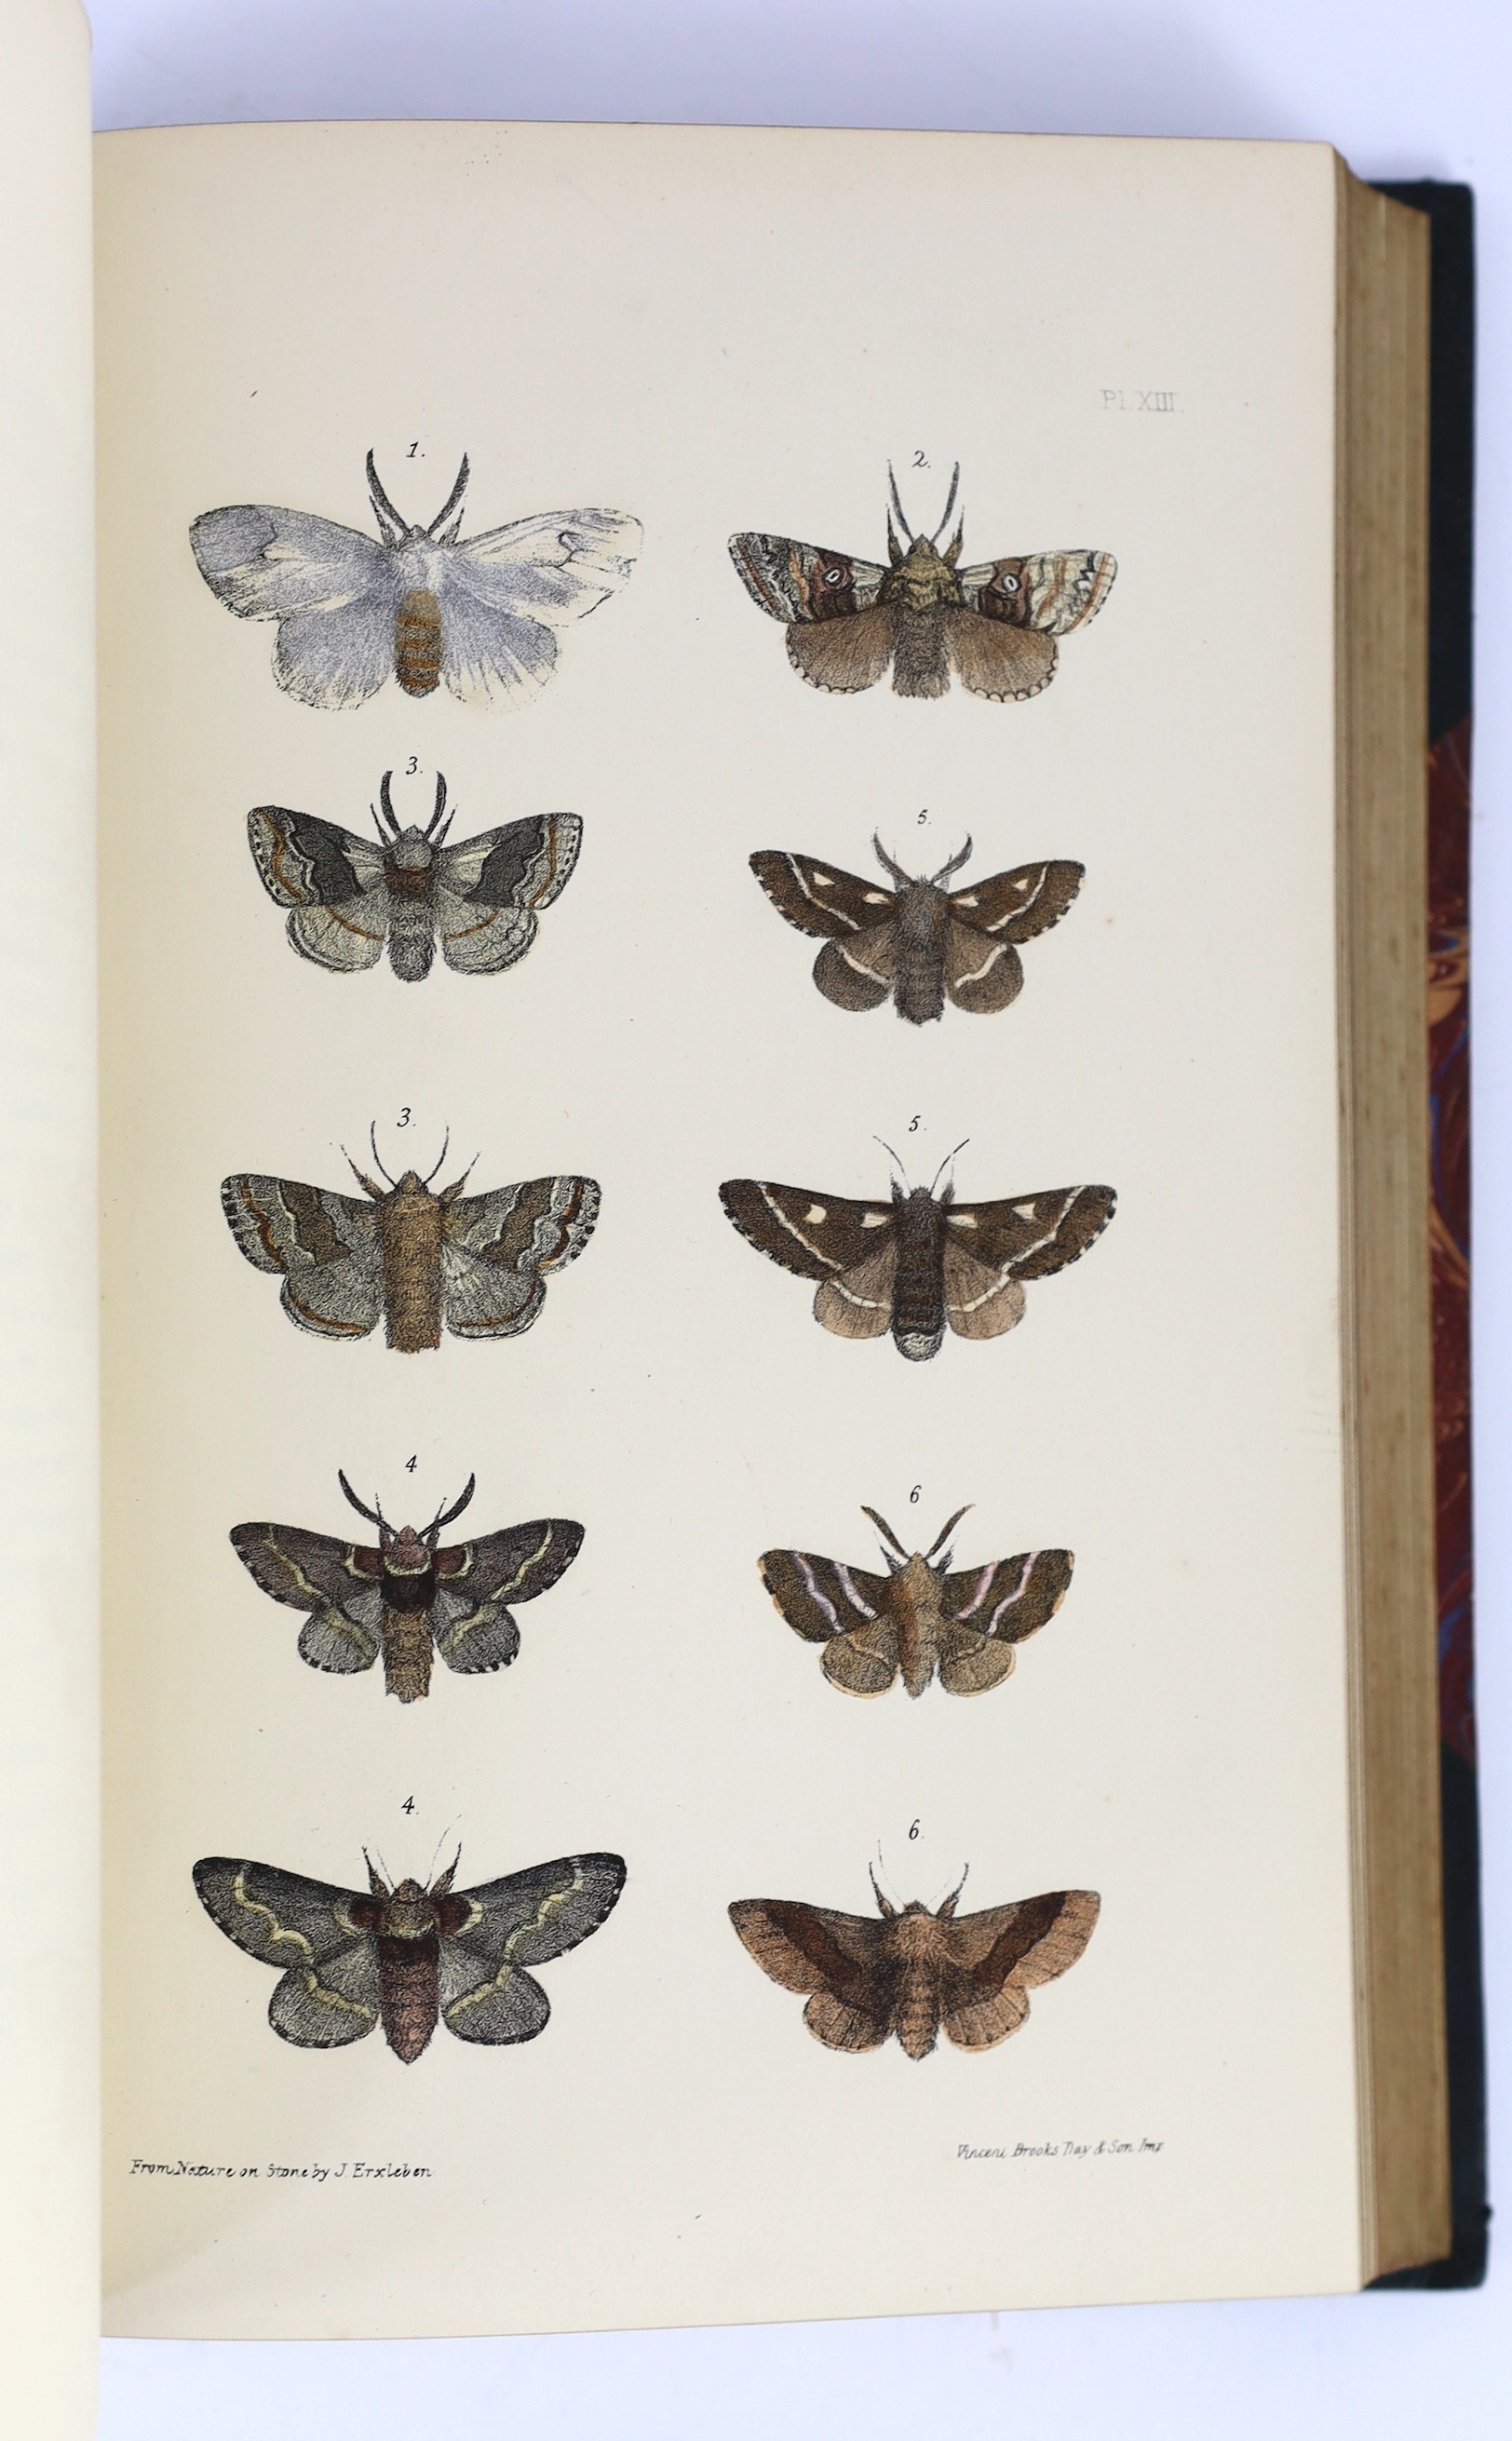 Morris, Rev. Francis Orpen - A Natural History of British Moths...4 vols. 132 hand coloured plates; contemp. half morocco and marbled boards, gilt decorated panelled spines, ge. and marbled e/ps., roy. 8vo. 1872